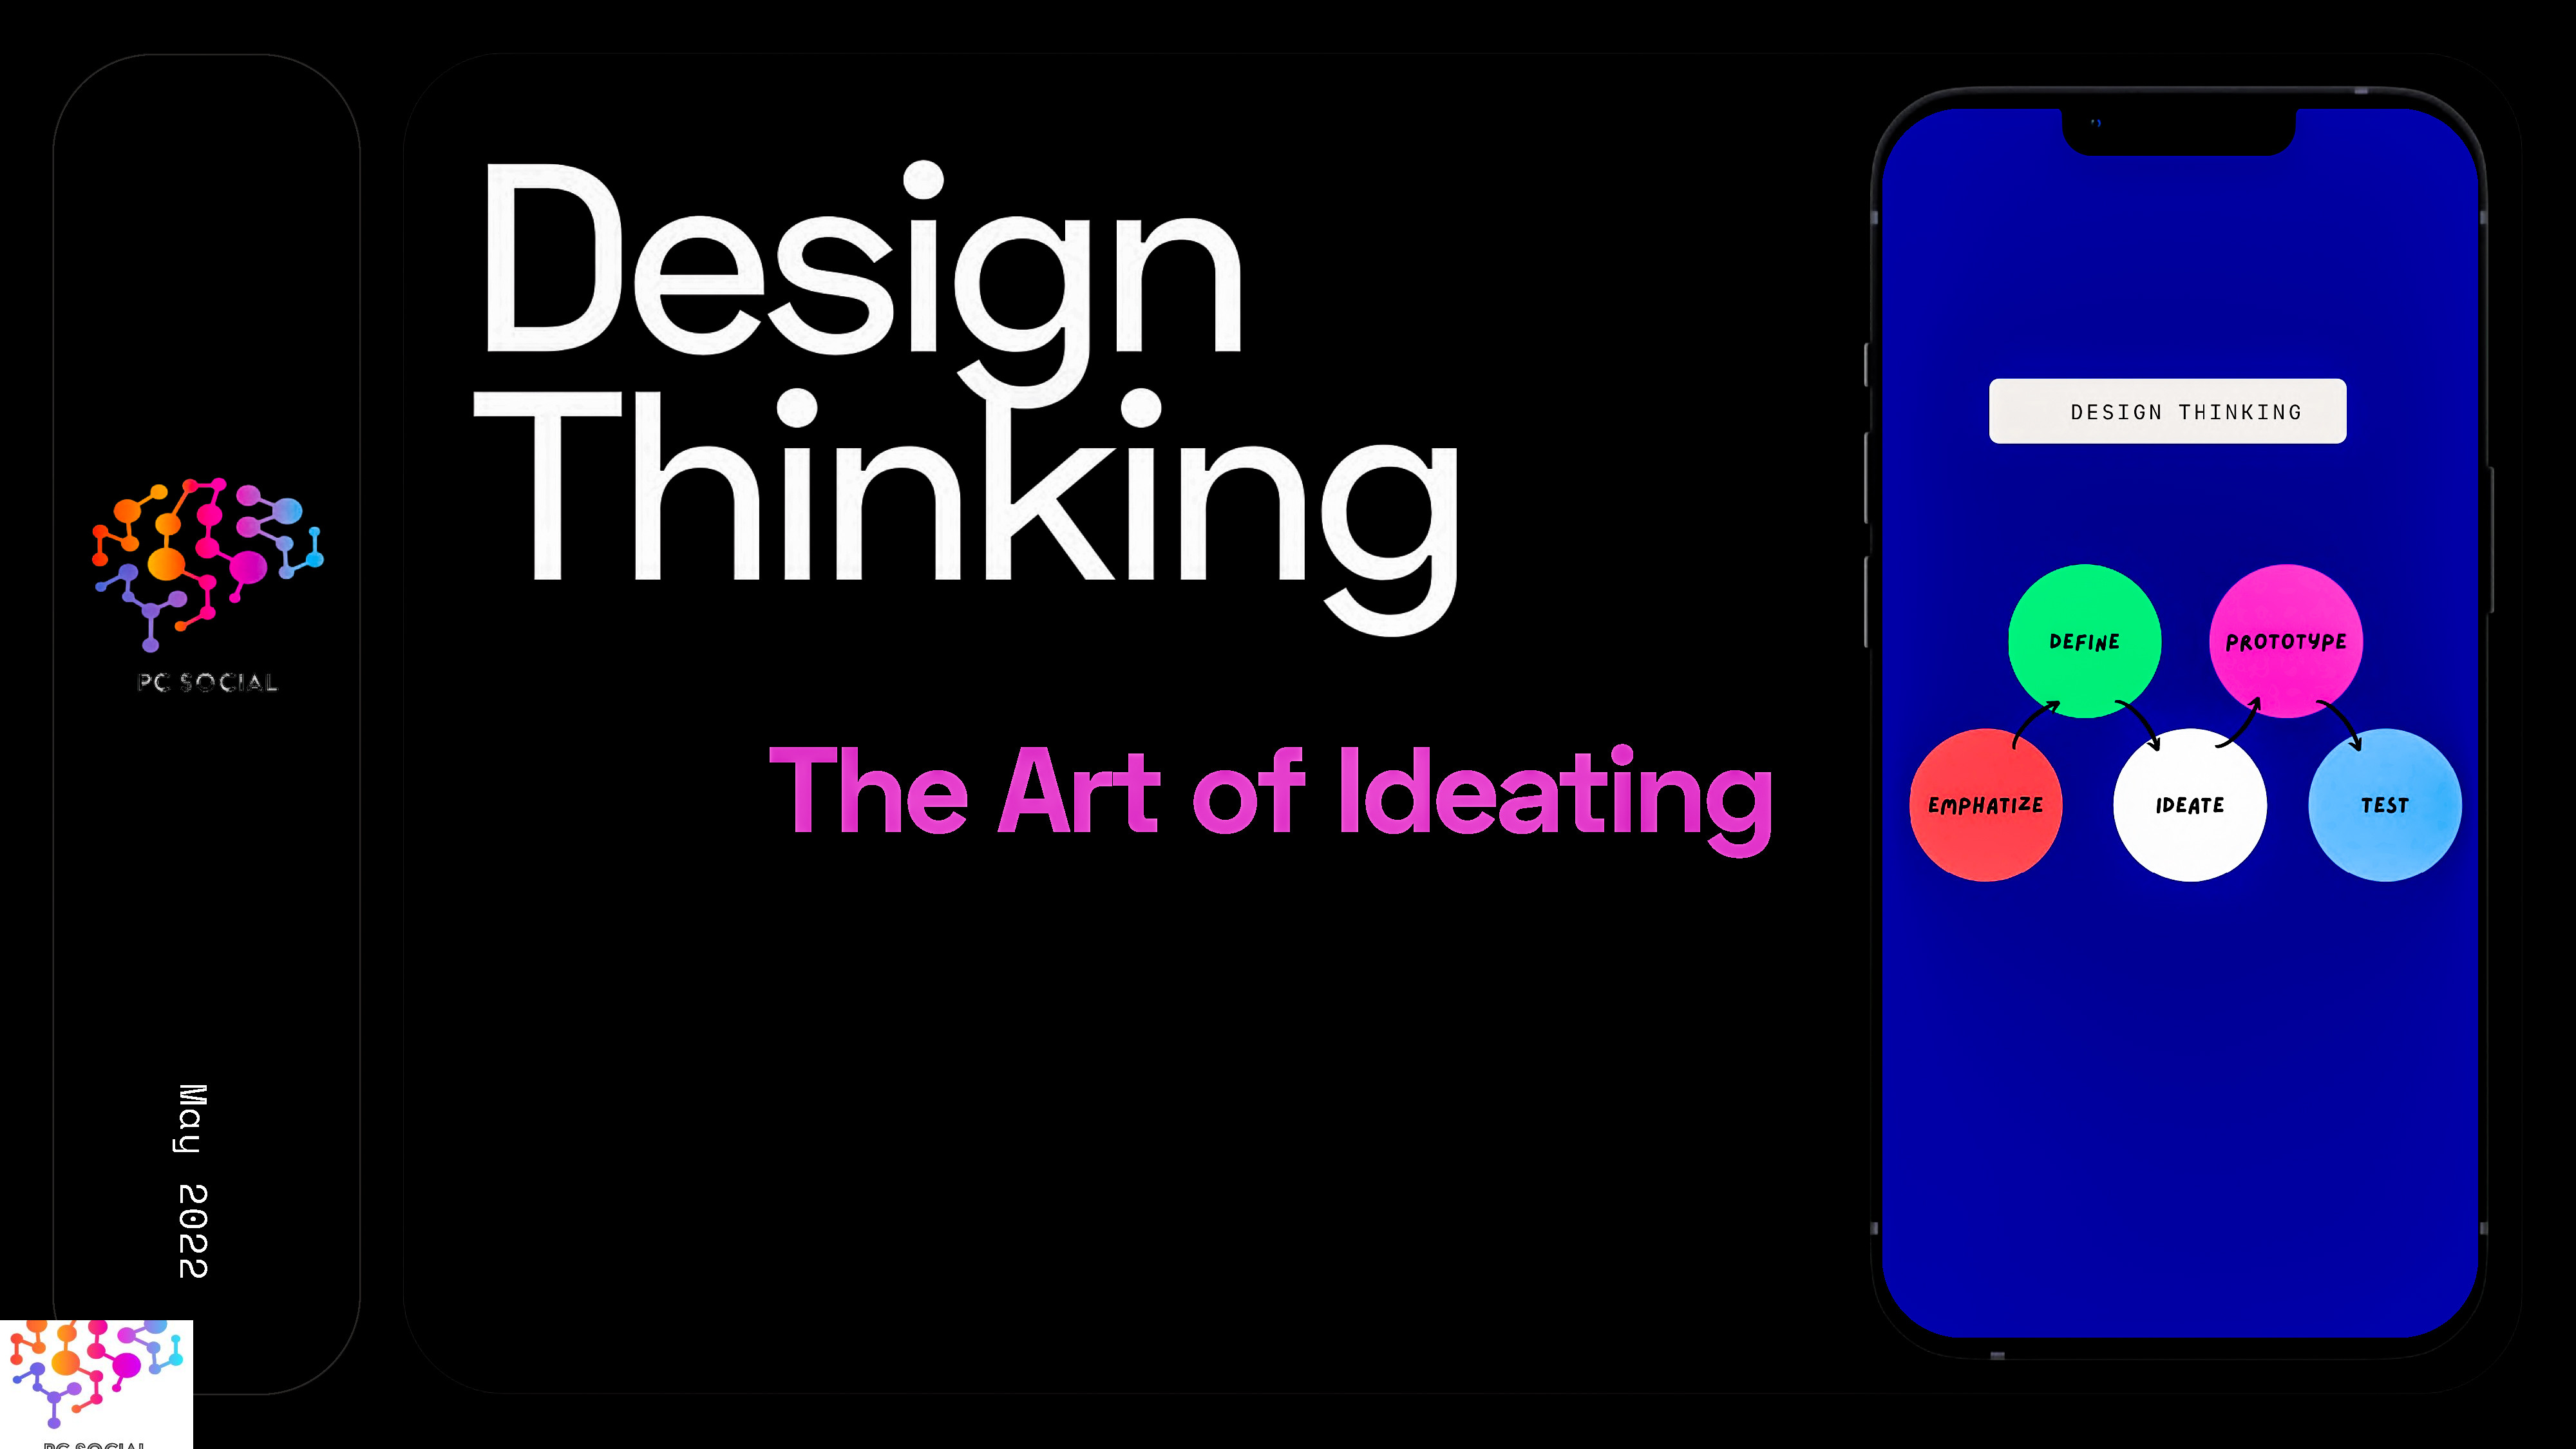 Design, Marketing, Product Management, Design Thinking, Innovation, Phases project Consultants, Llc | Pc Social